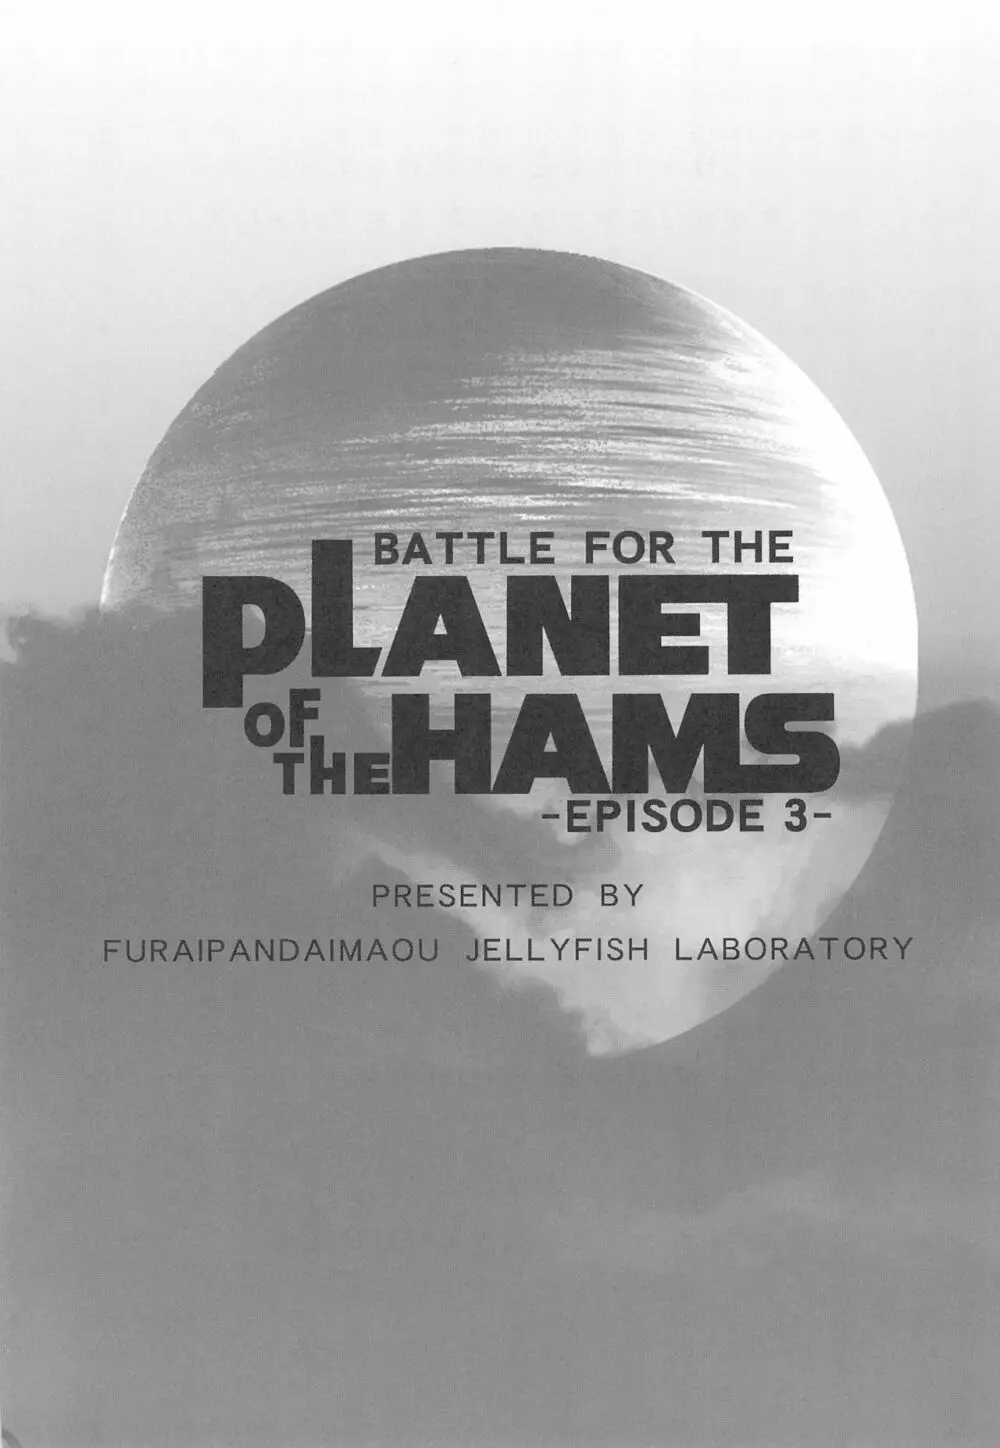 BATTLE FOR THE PLANET OF THE HAMS -EPISODE 3- 3ページ